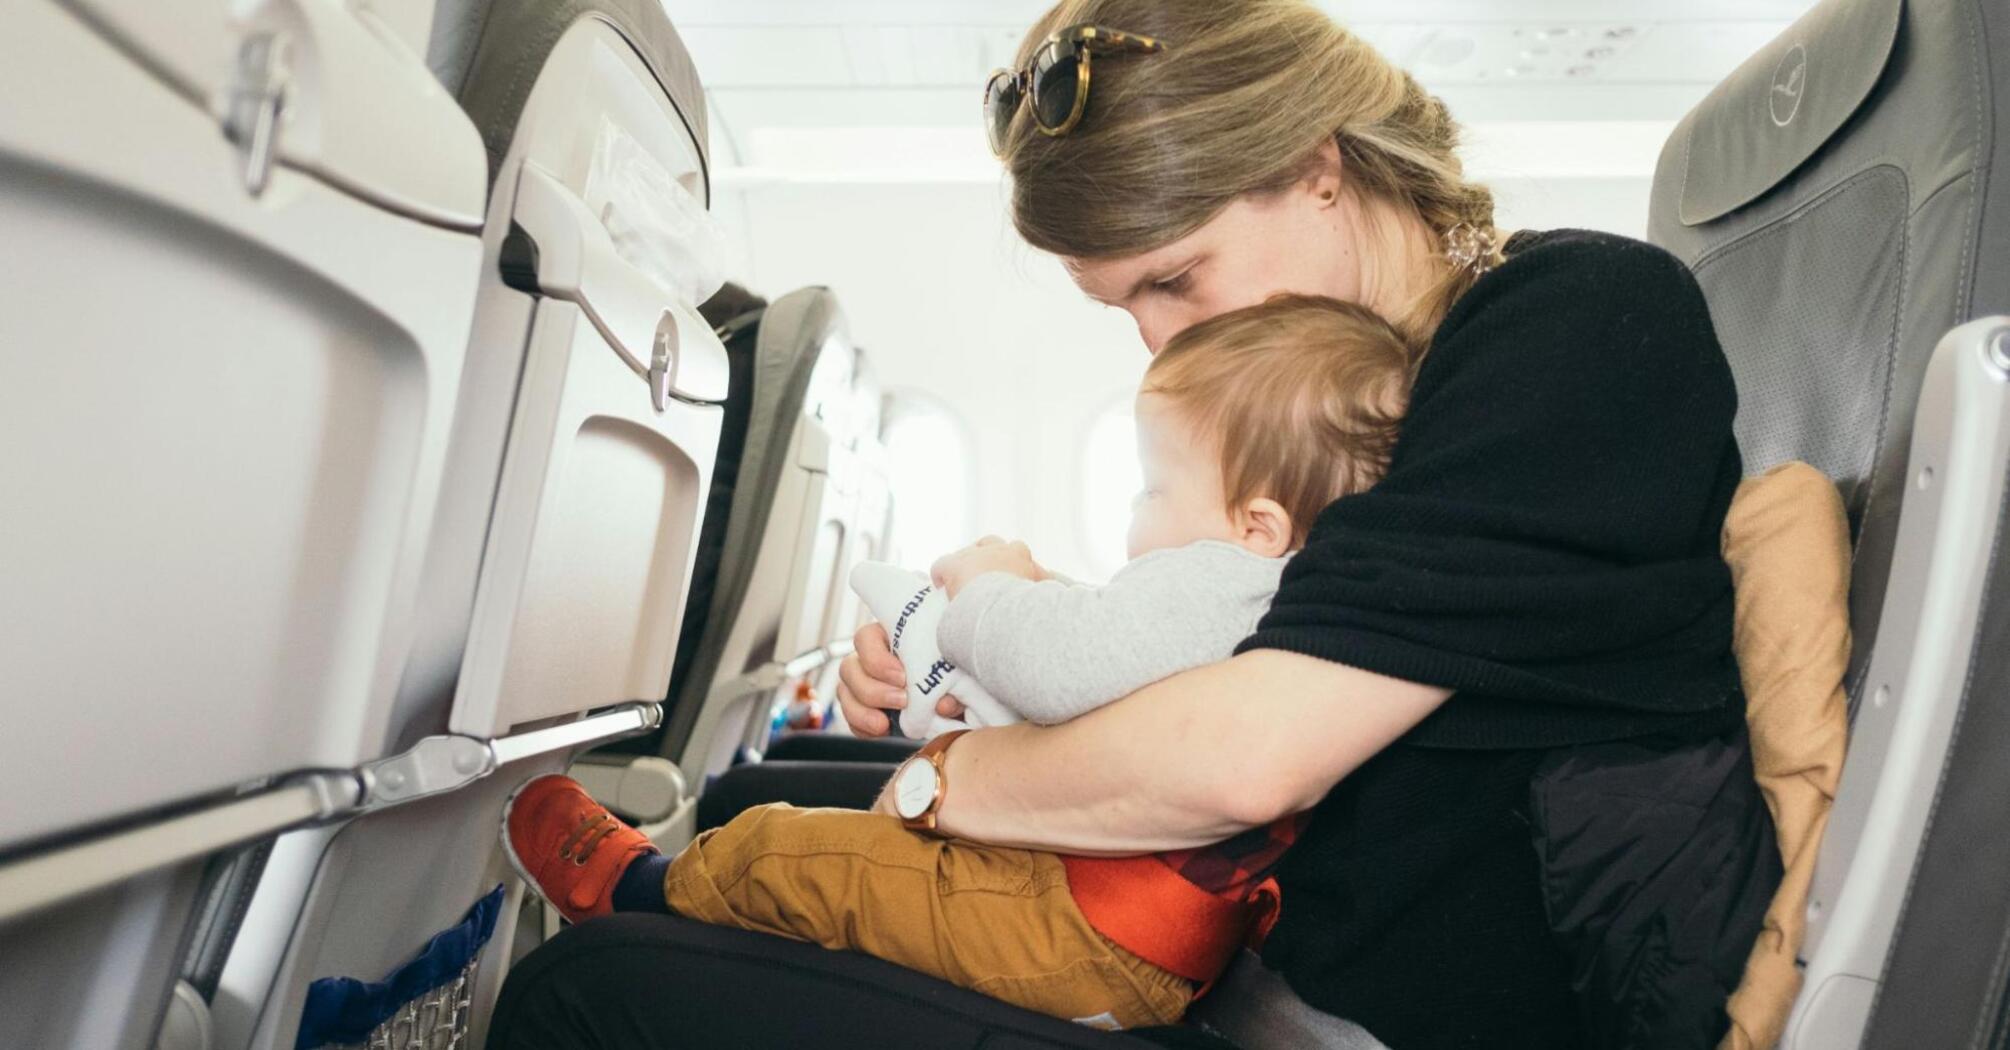 Mother with a child in her arms in the airplane cabin